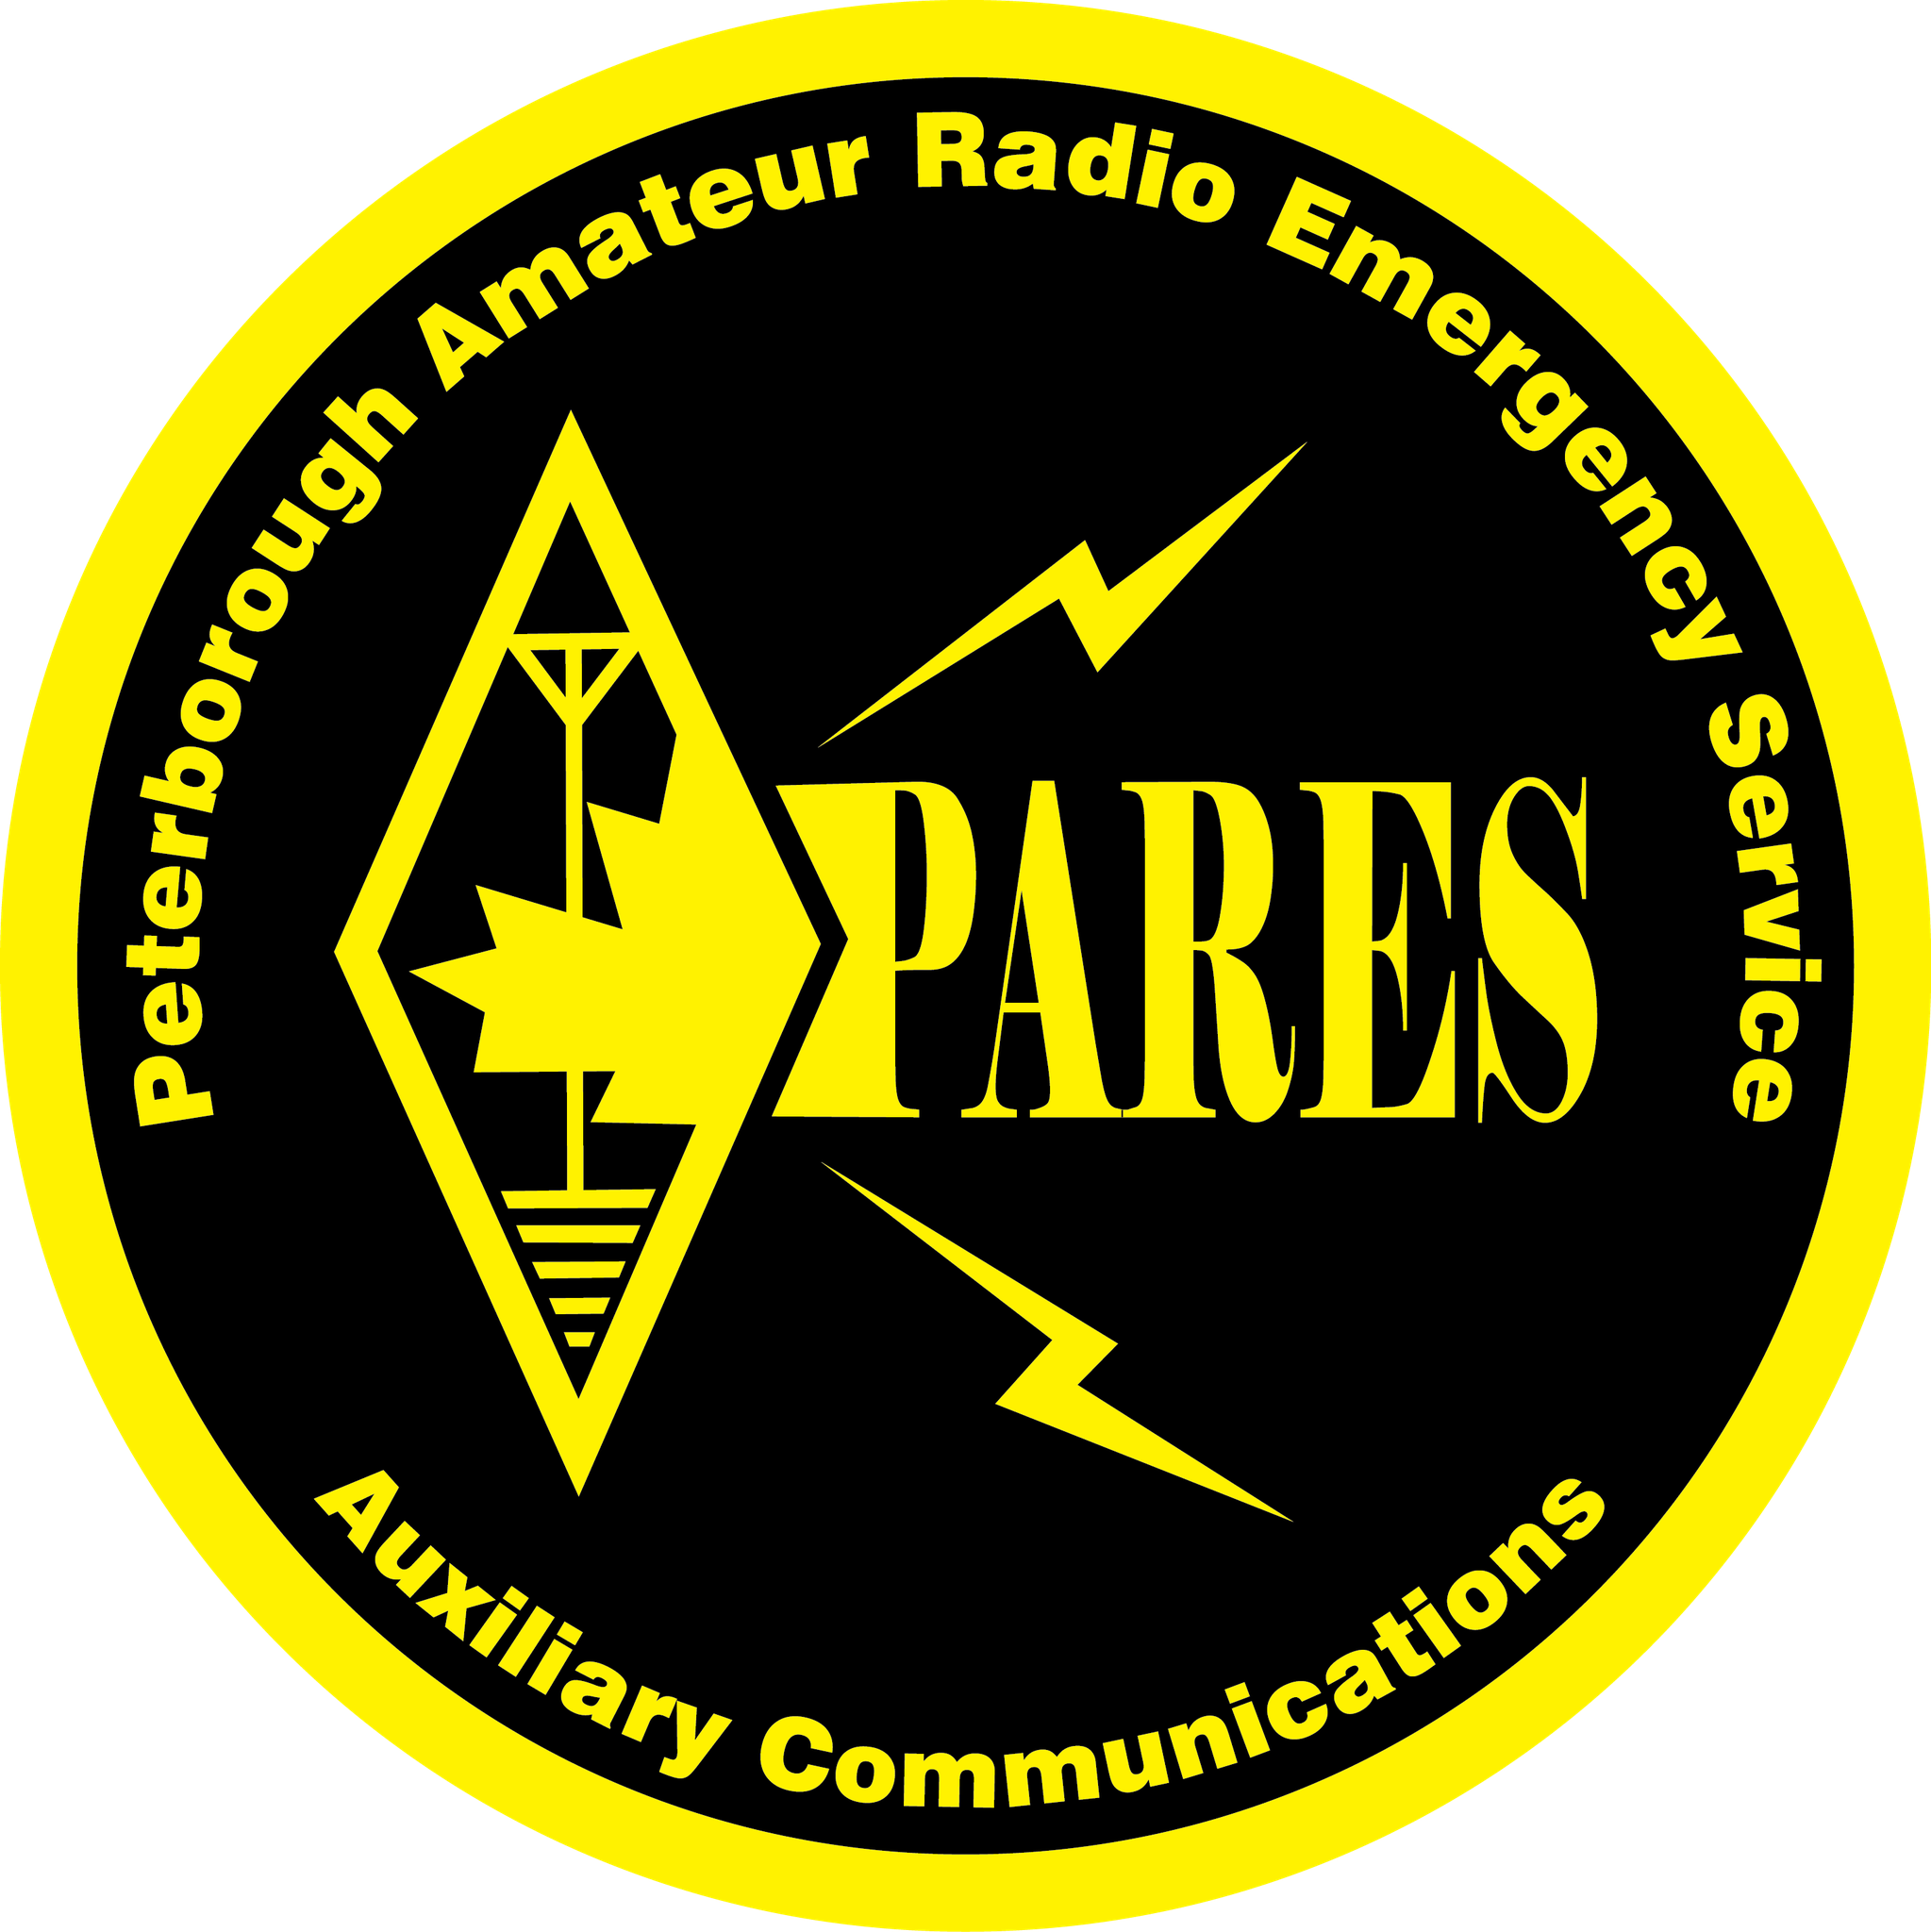 Peterborough Auxiliary Communications Service